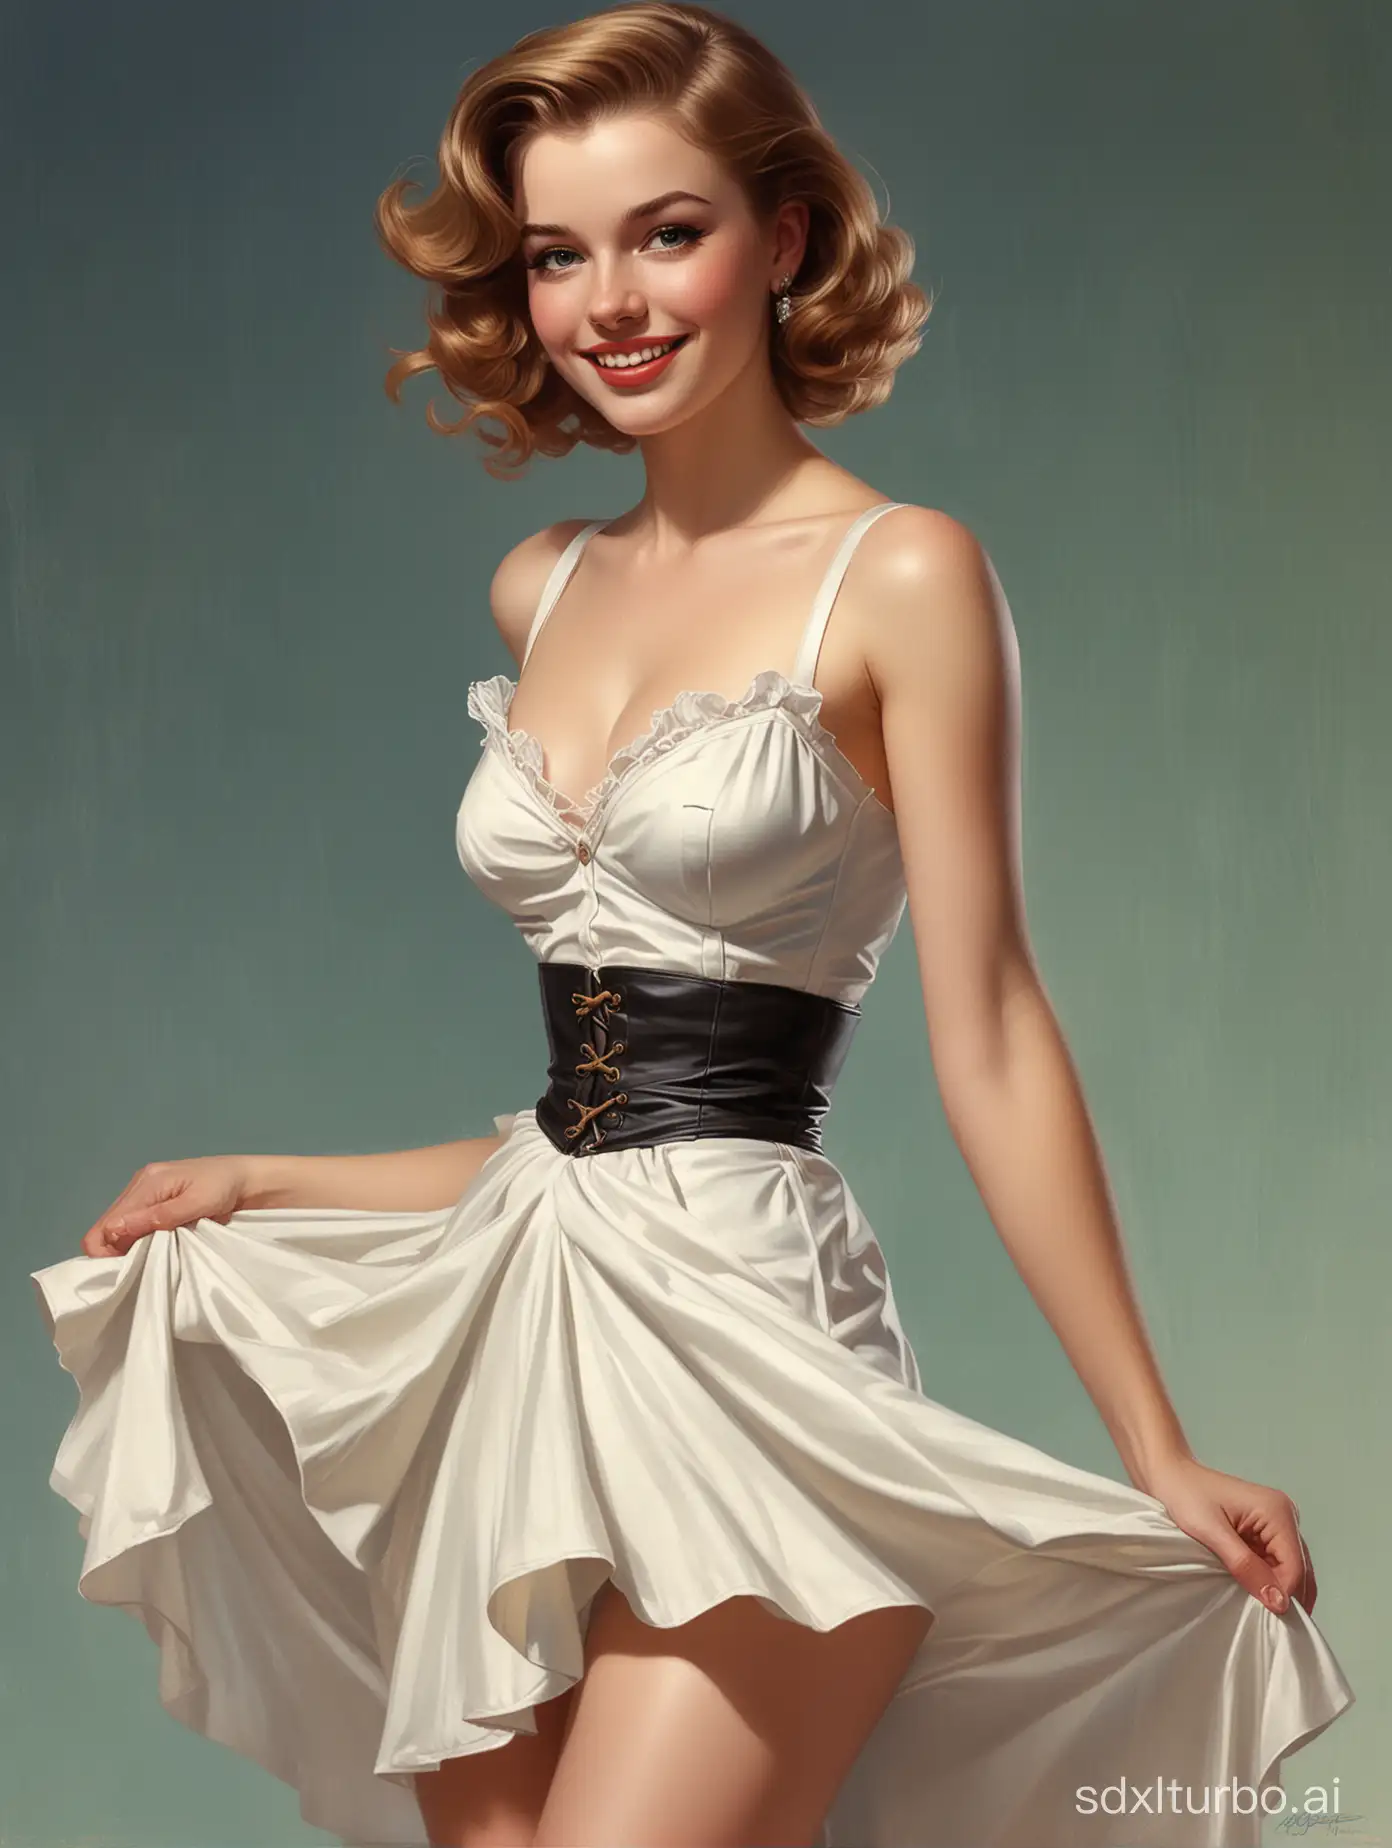 Vintage-PinUp-Girl-with-Welcoming-Grin